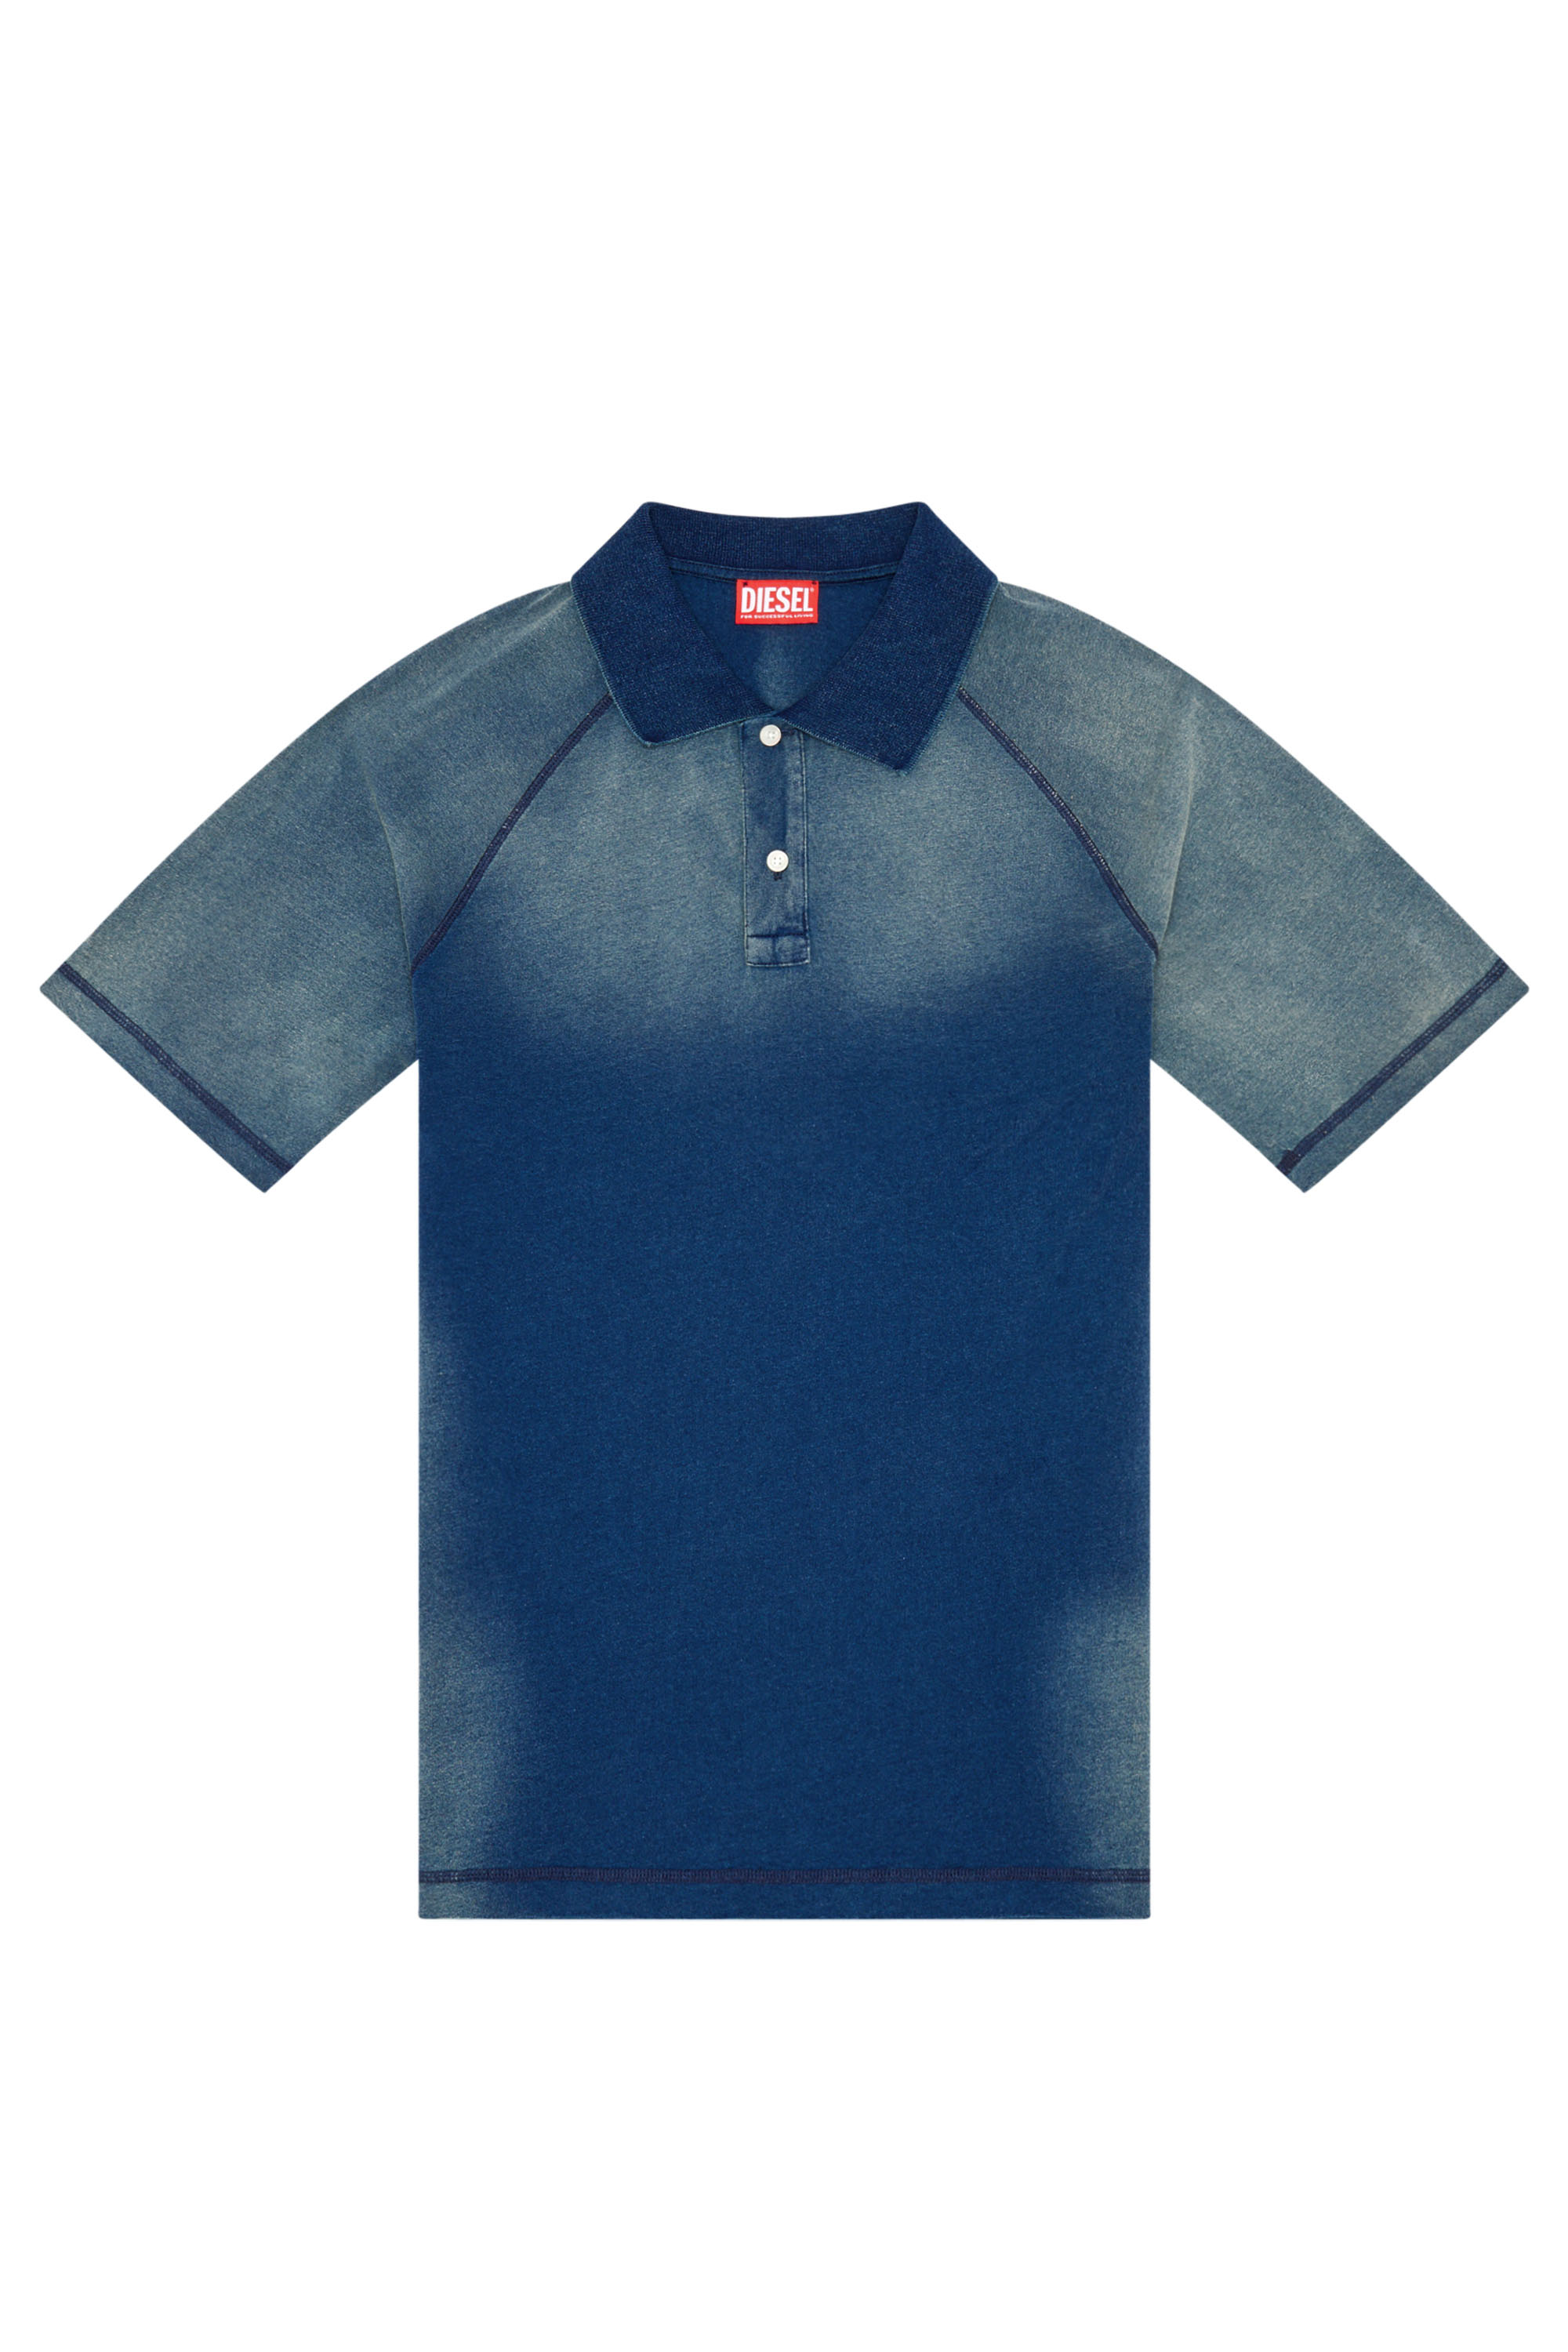 Diesel - T-RASMITH, Man Polo shirt with sun-faded effects in Blue - Image 4